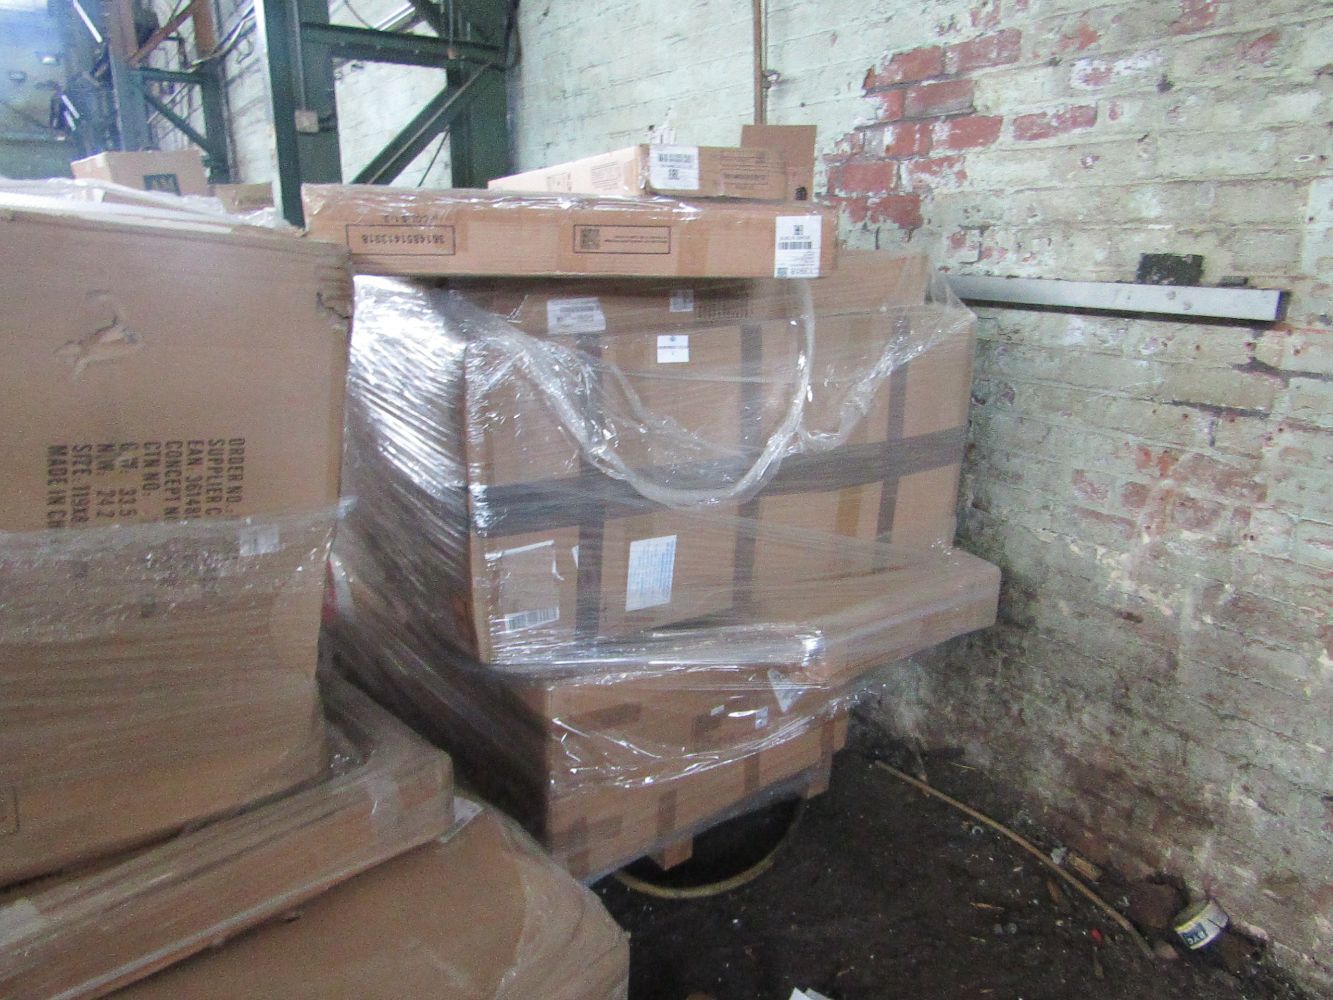 Pallets of Unworked Raw Customer Furniture returns from Made and La Redoute